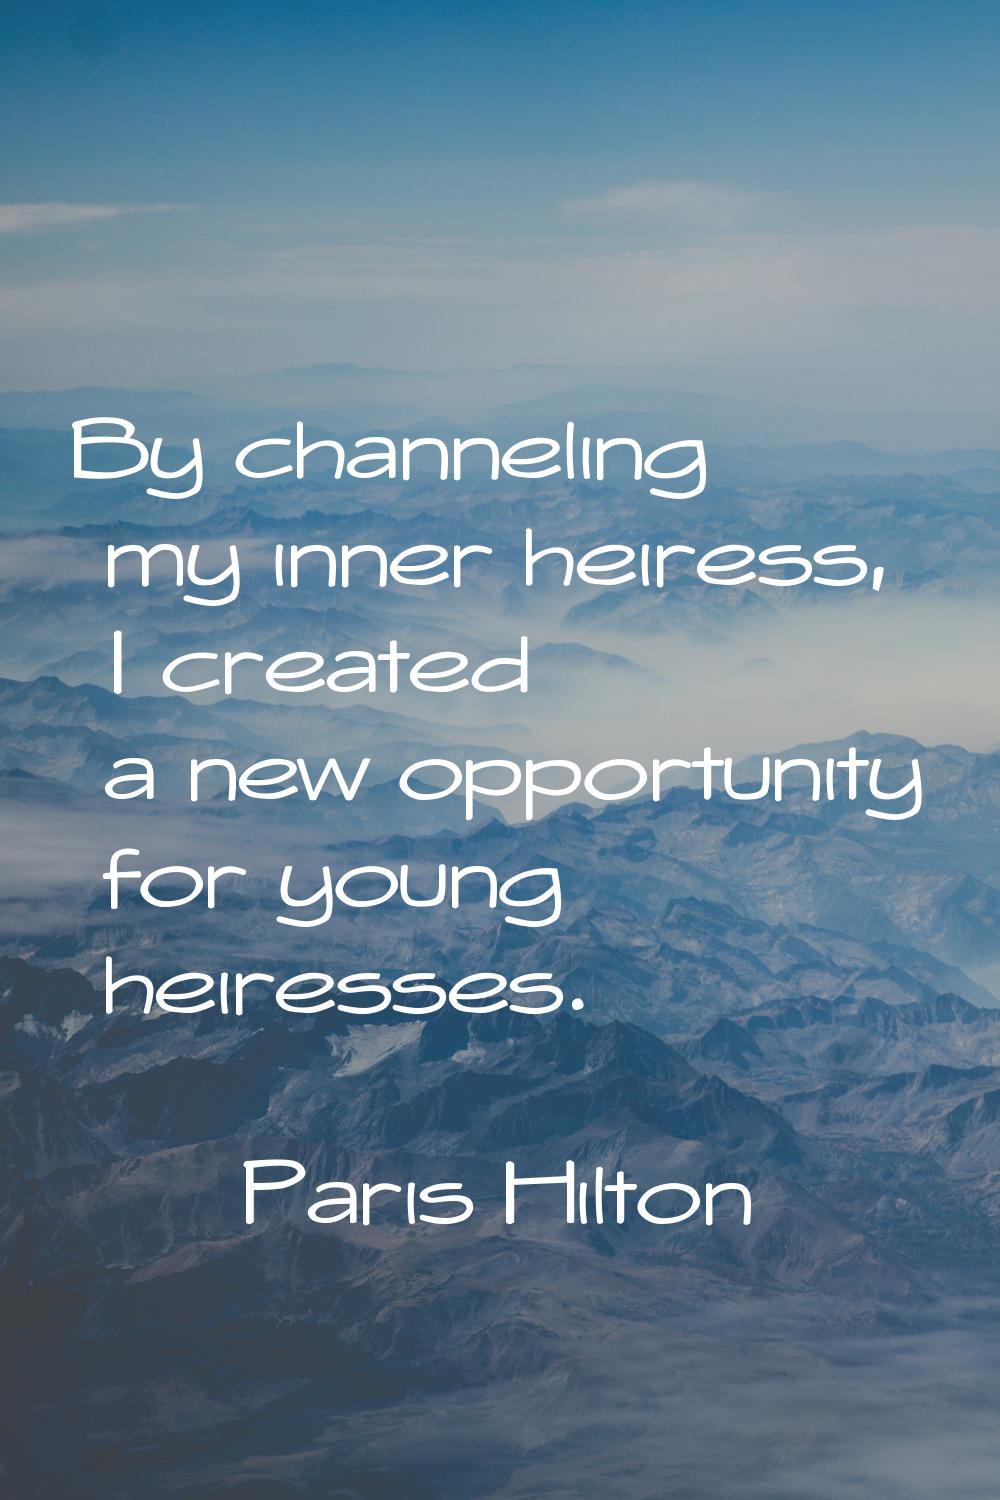 By channeling my inner heiress, I created a new opportunity for young heiresses.